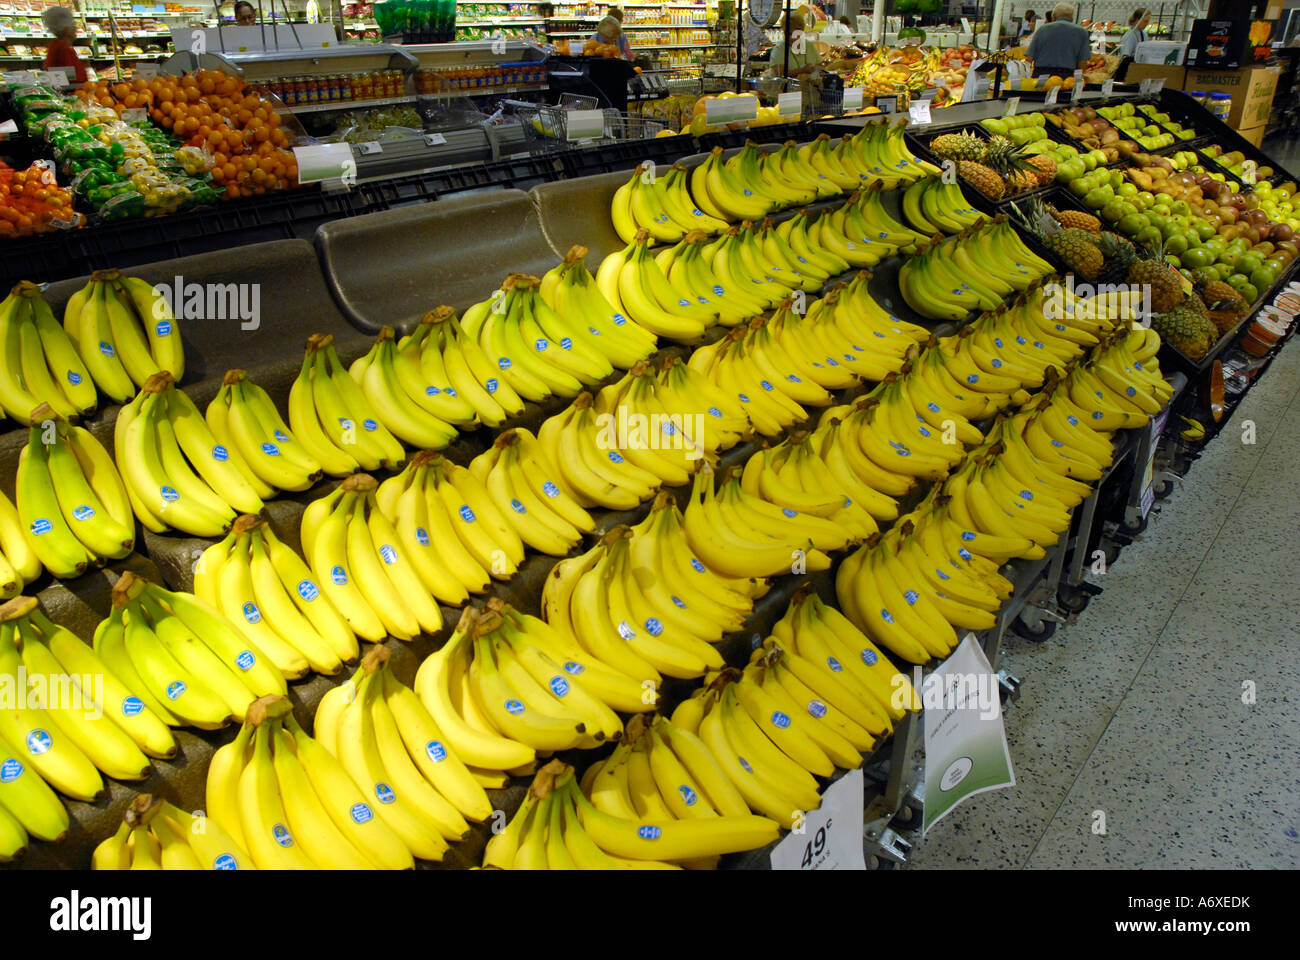 Bananas On Display In A Supermarket Grocery Store Stock Photo Royalty